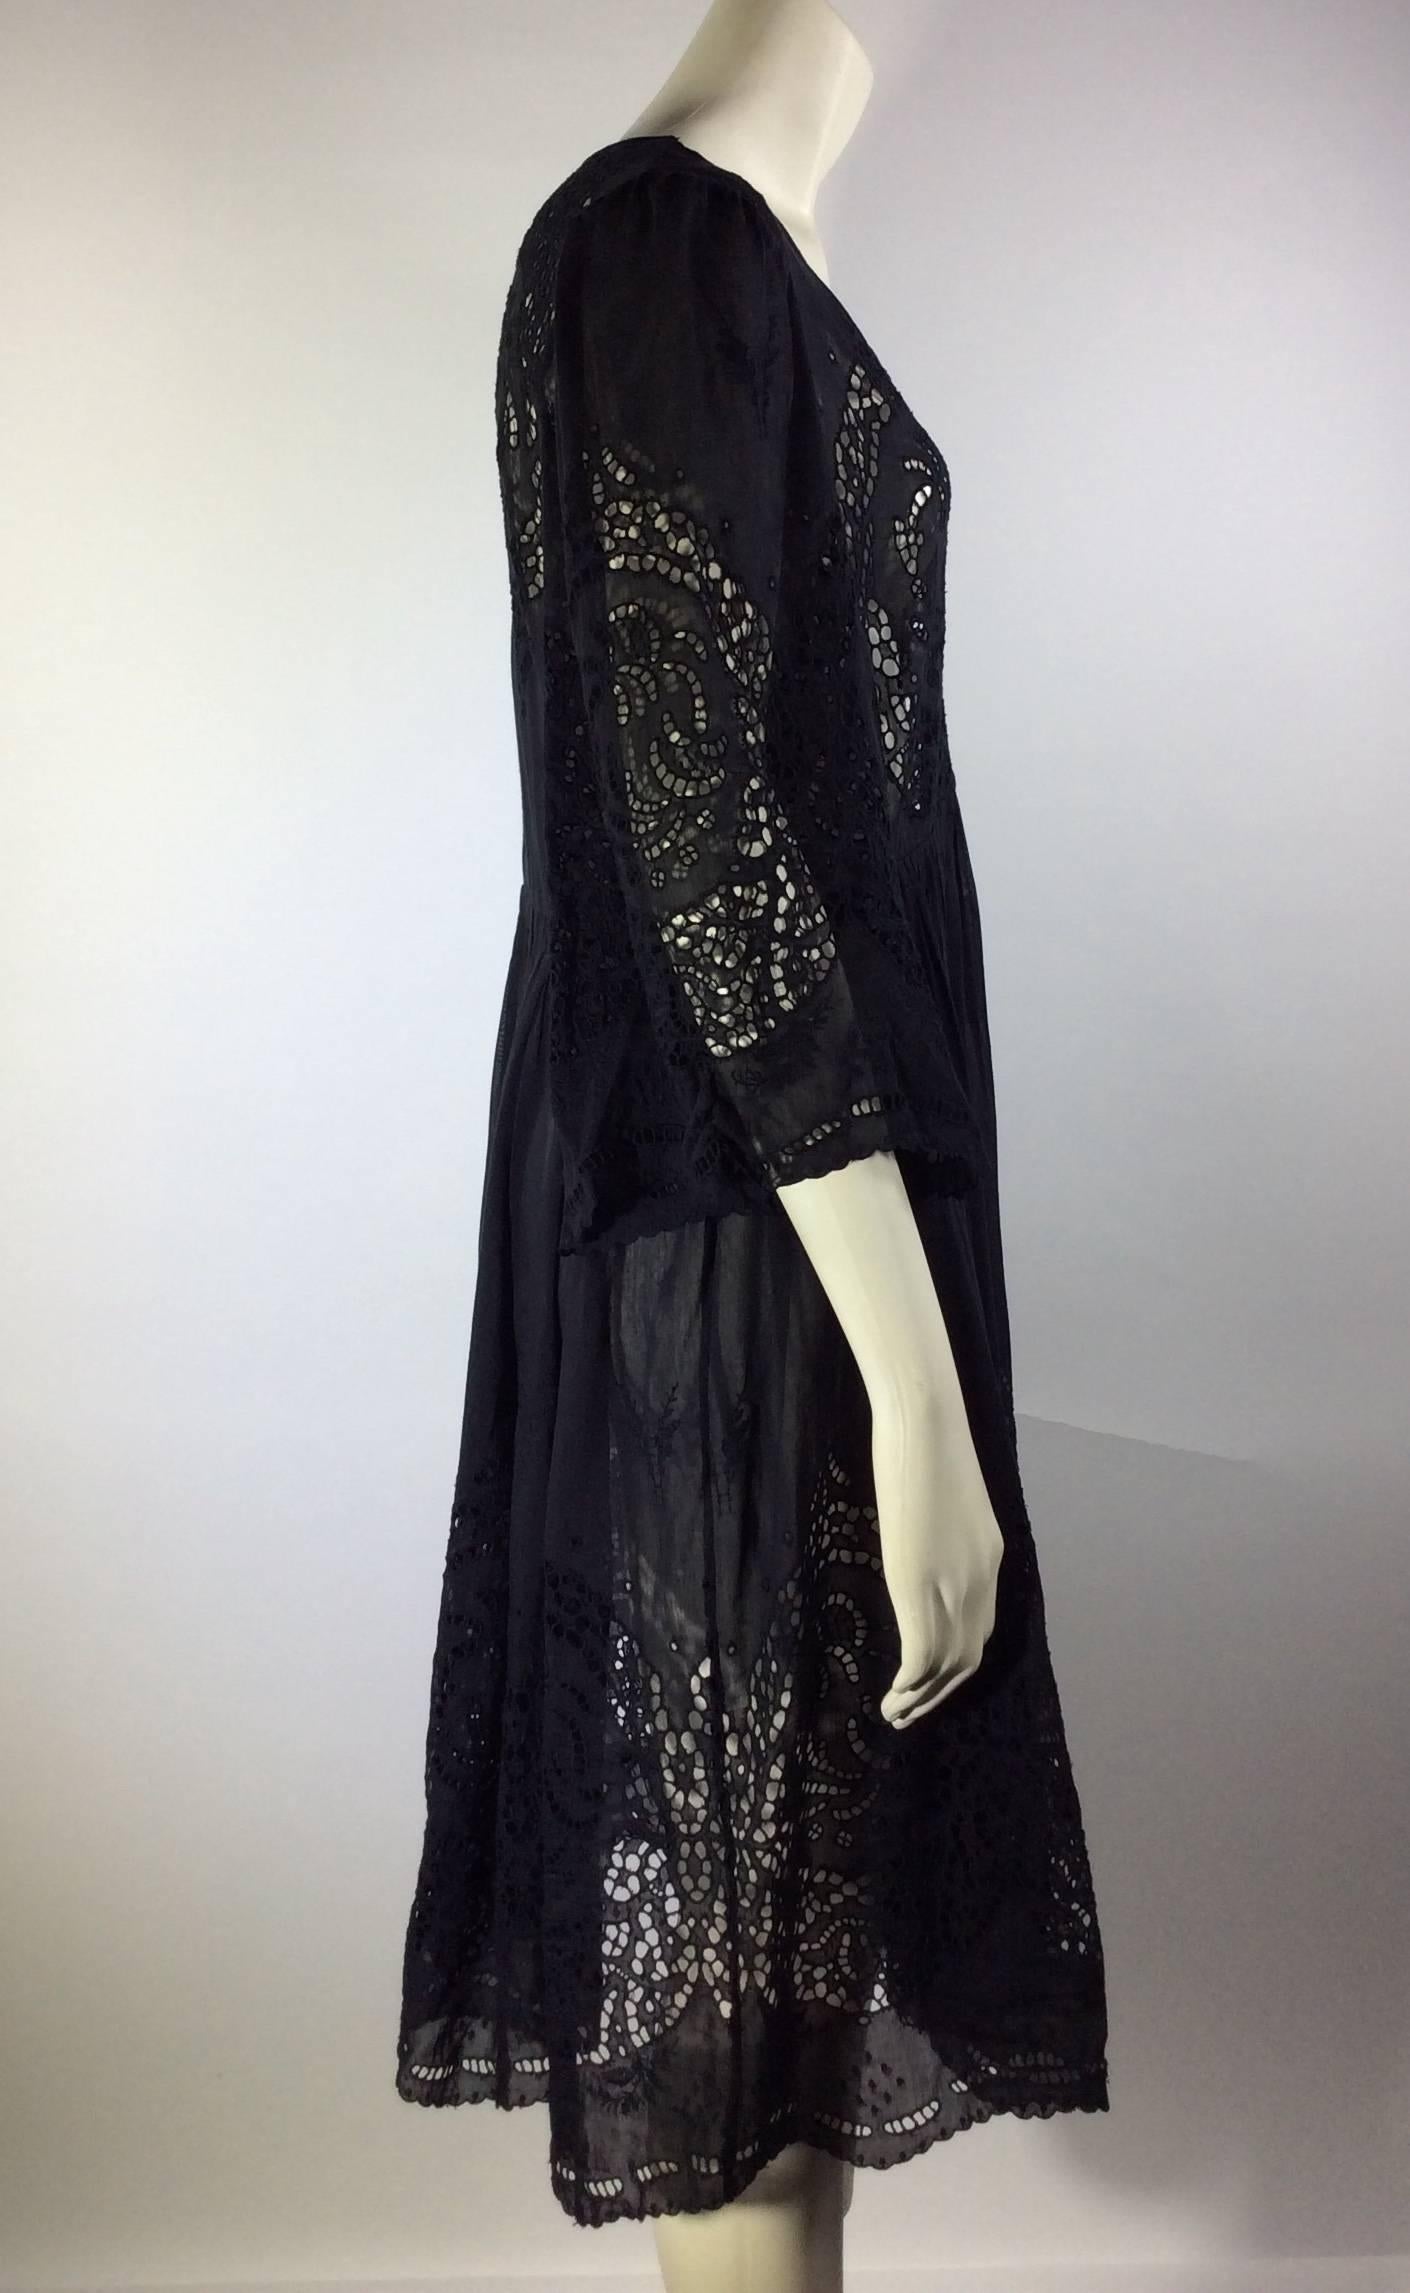 Stella McCartney Black Eyelet Dress In New Condition For Sale In Narberth, PA